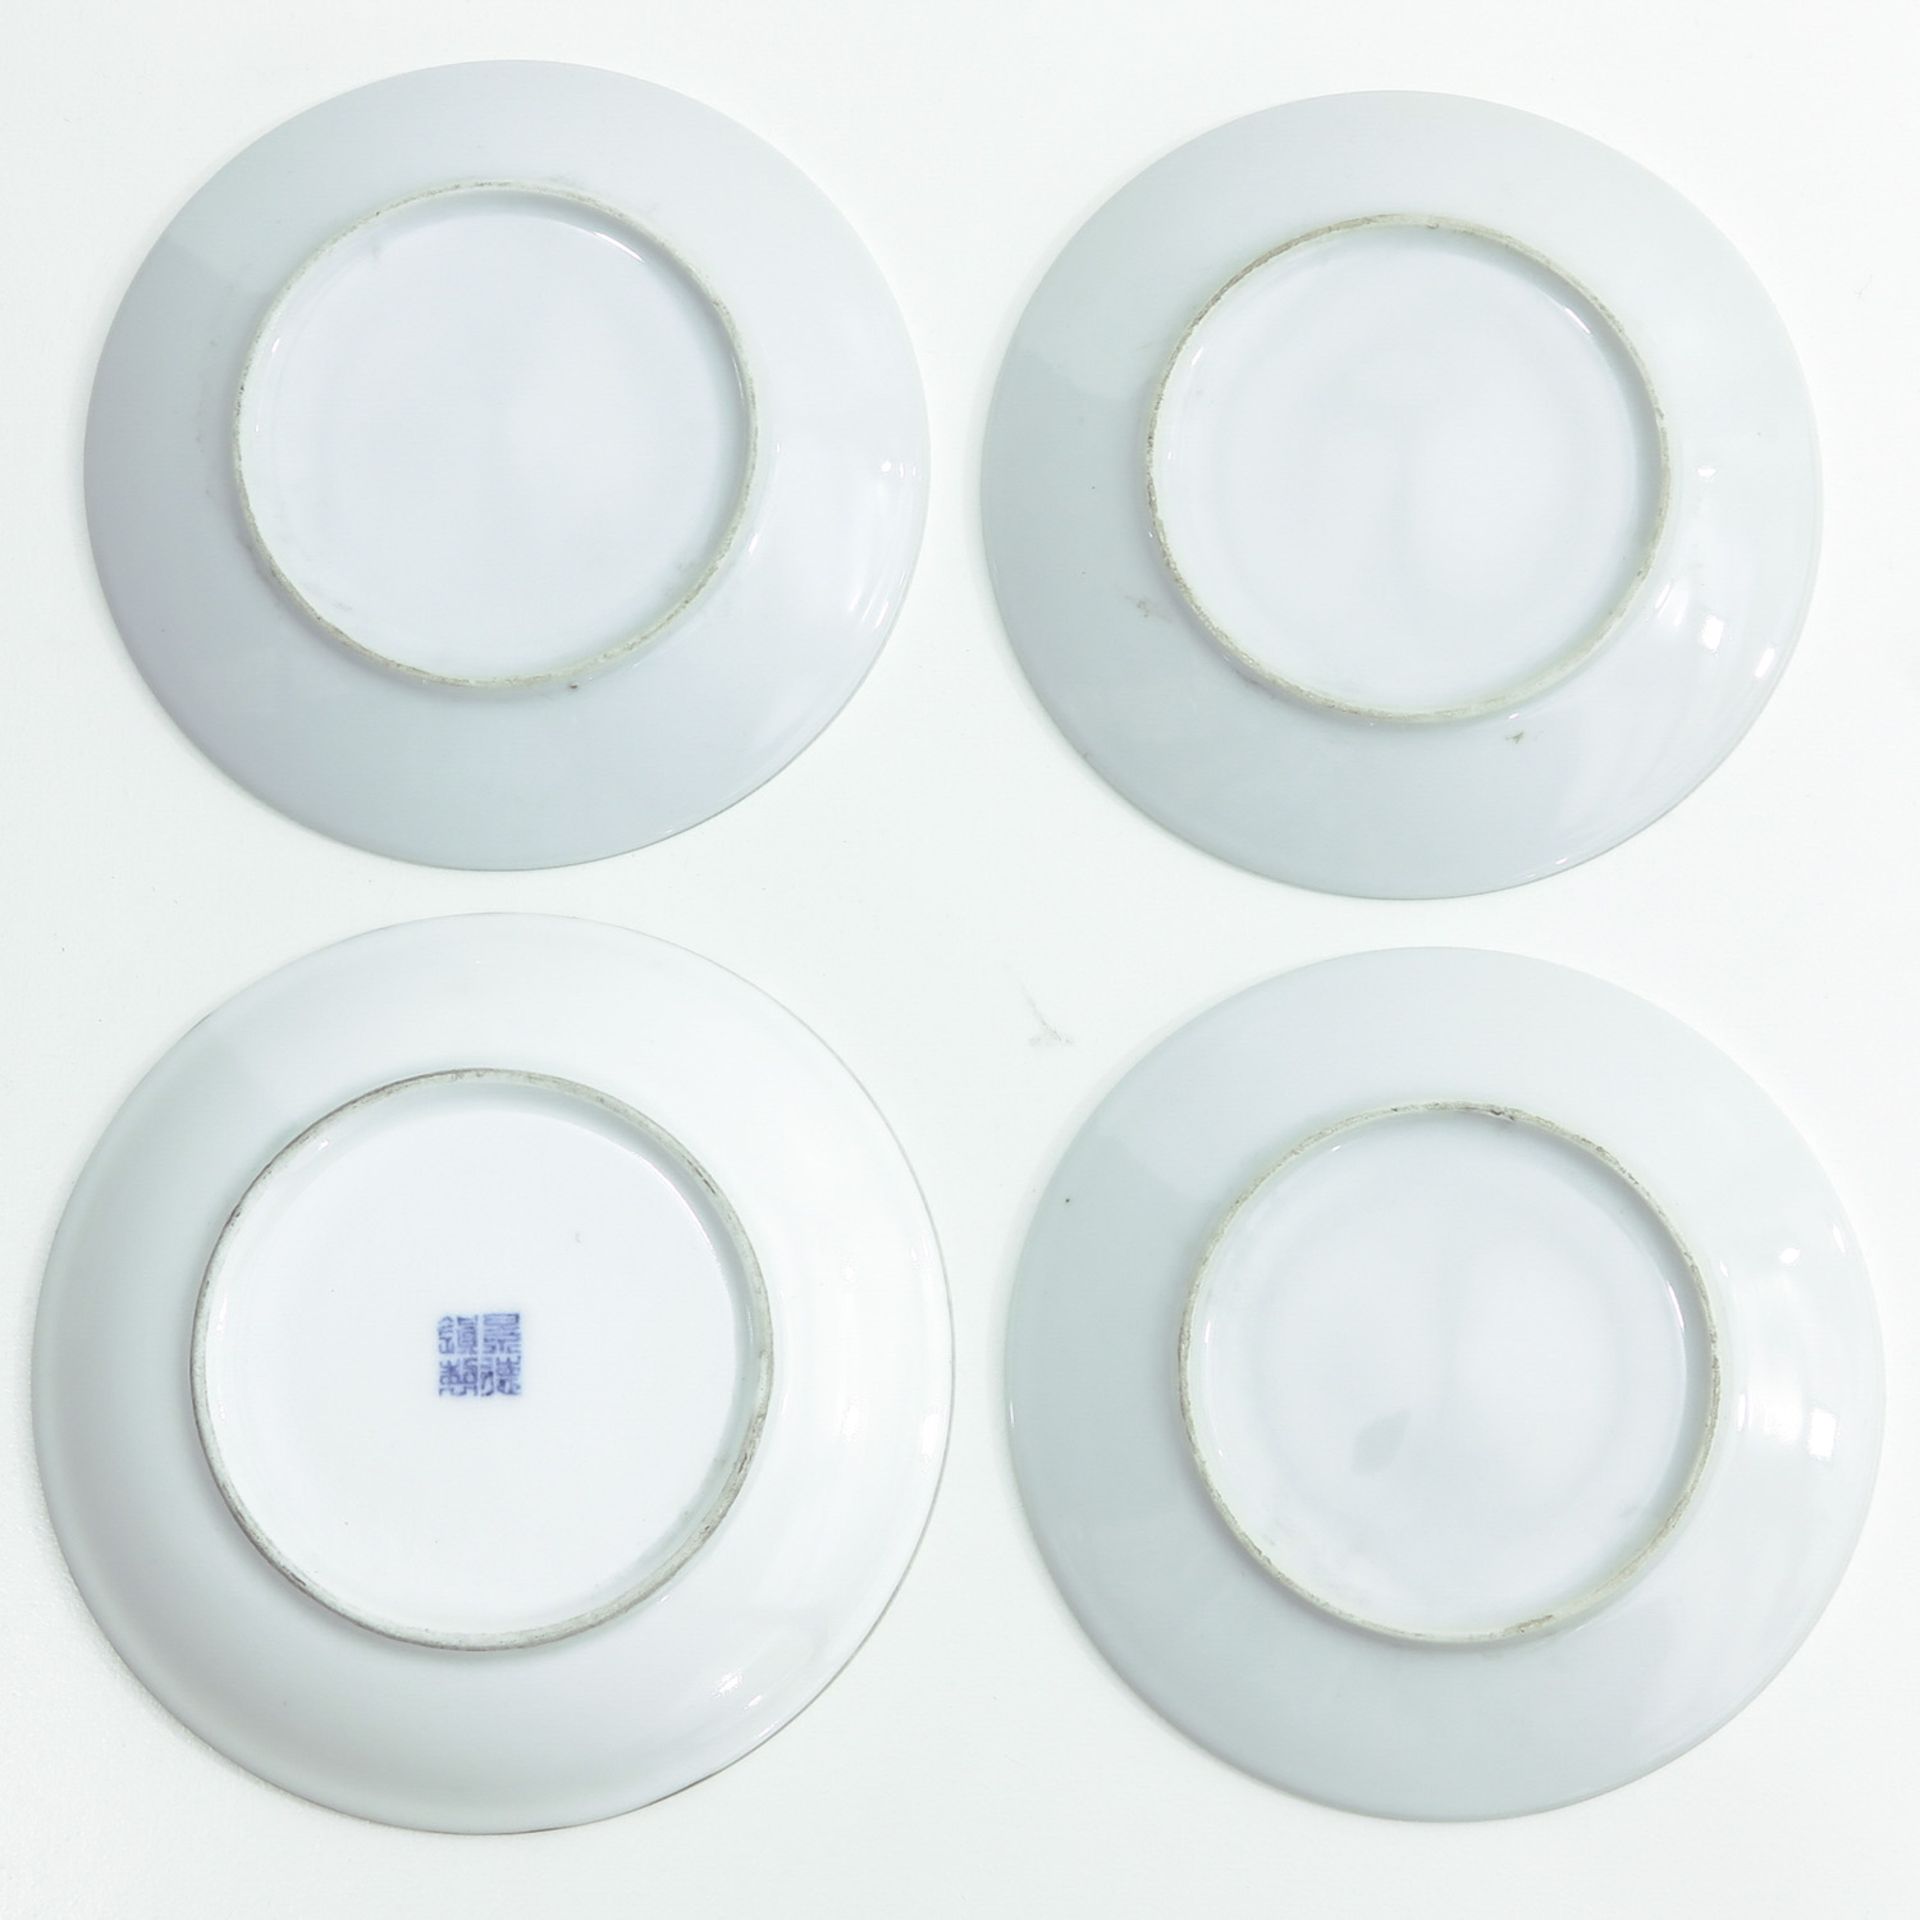 A Collection of 7 Small Plates - Bild 4 aus 10